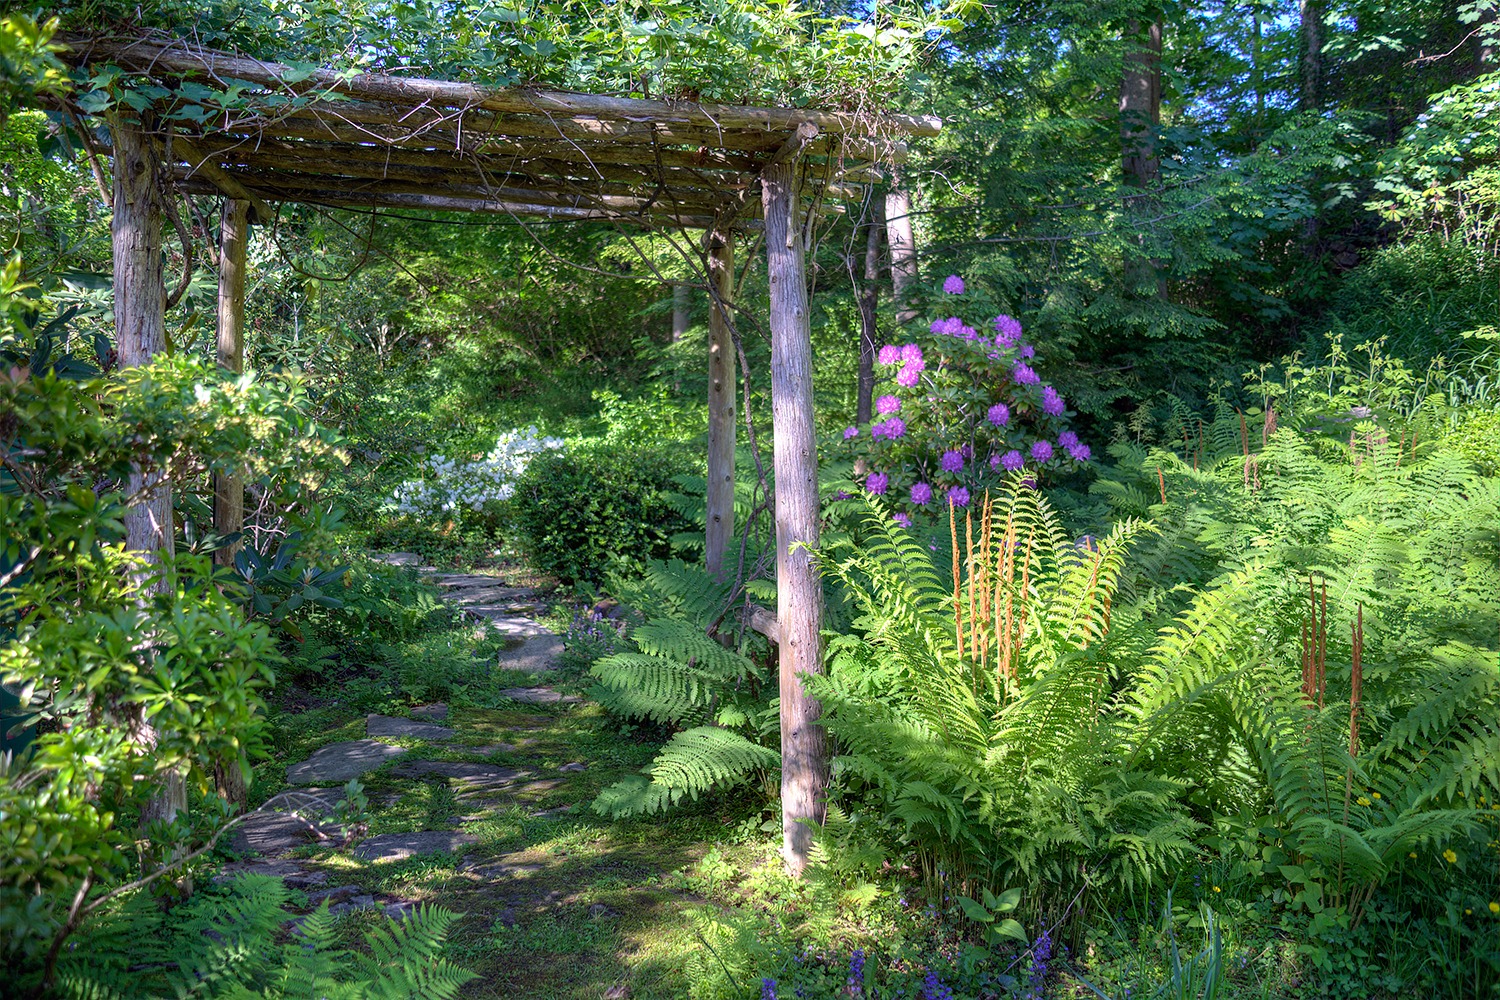 A serene garden pathway lined with vibrant green ferns under a rustic wooden pergola, surrounded by lush foliage and blooming purple flowers.